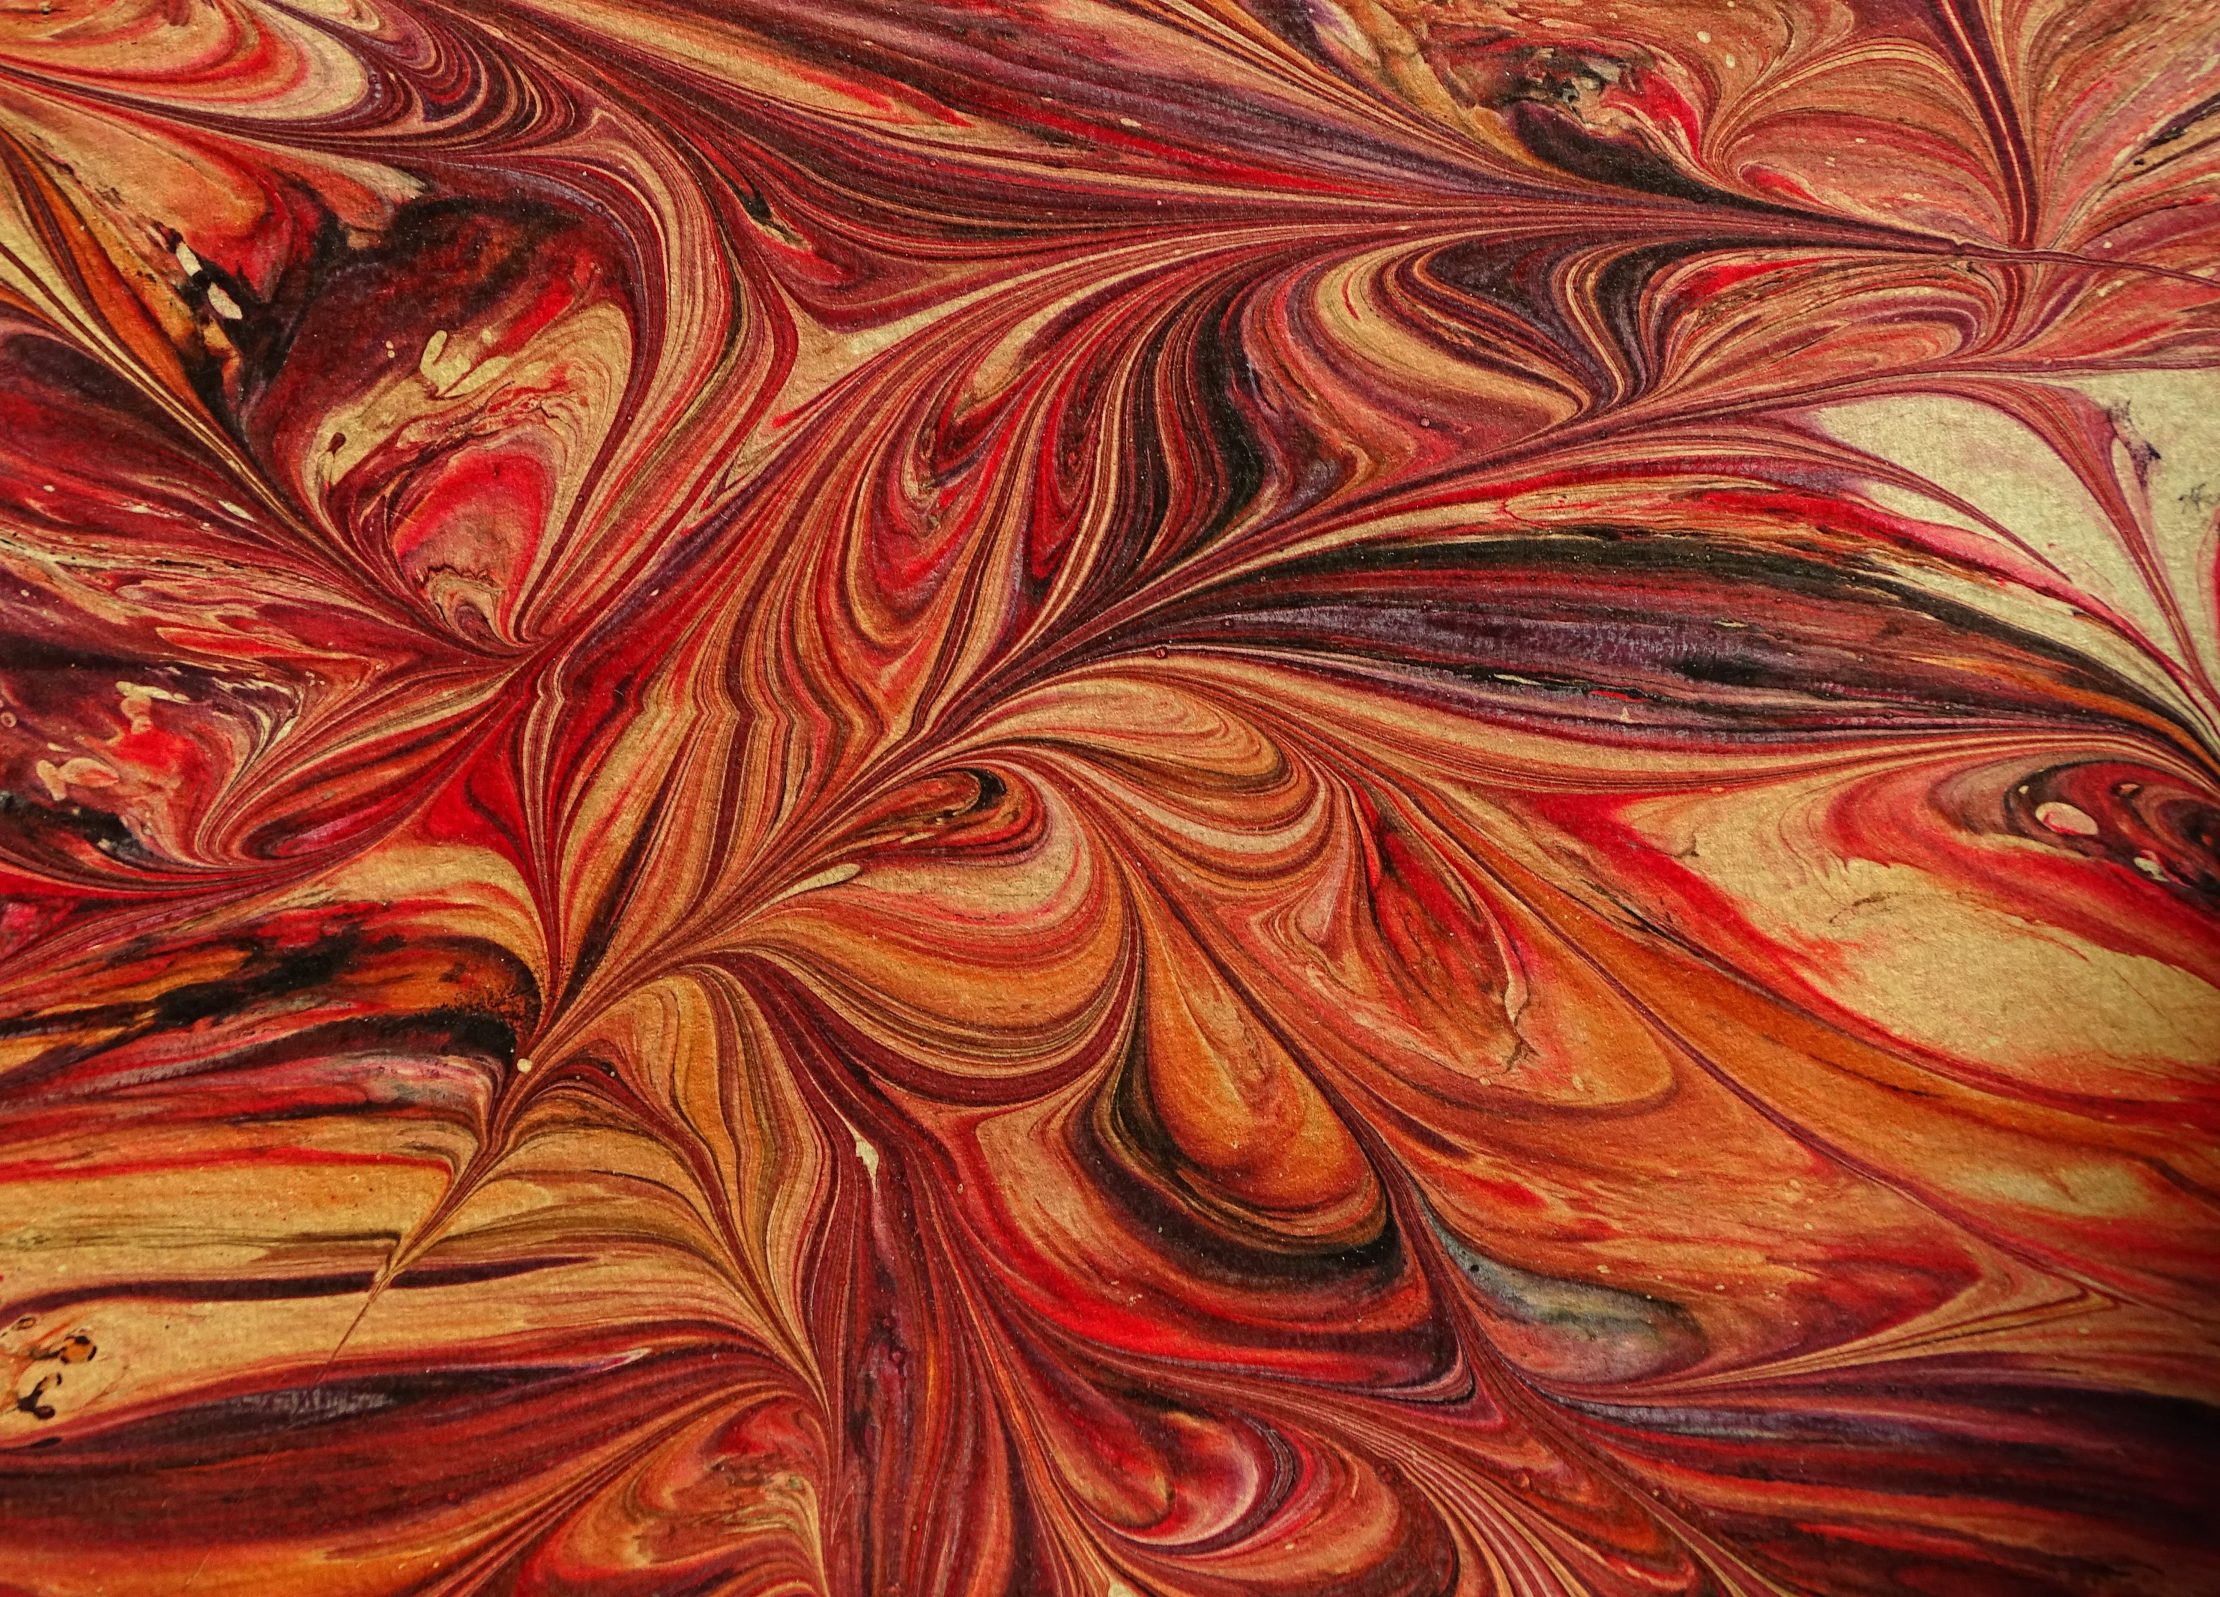 Marbled paper from Venice